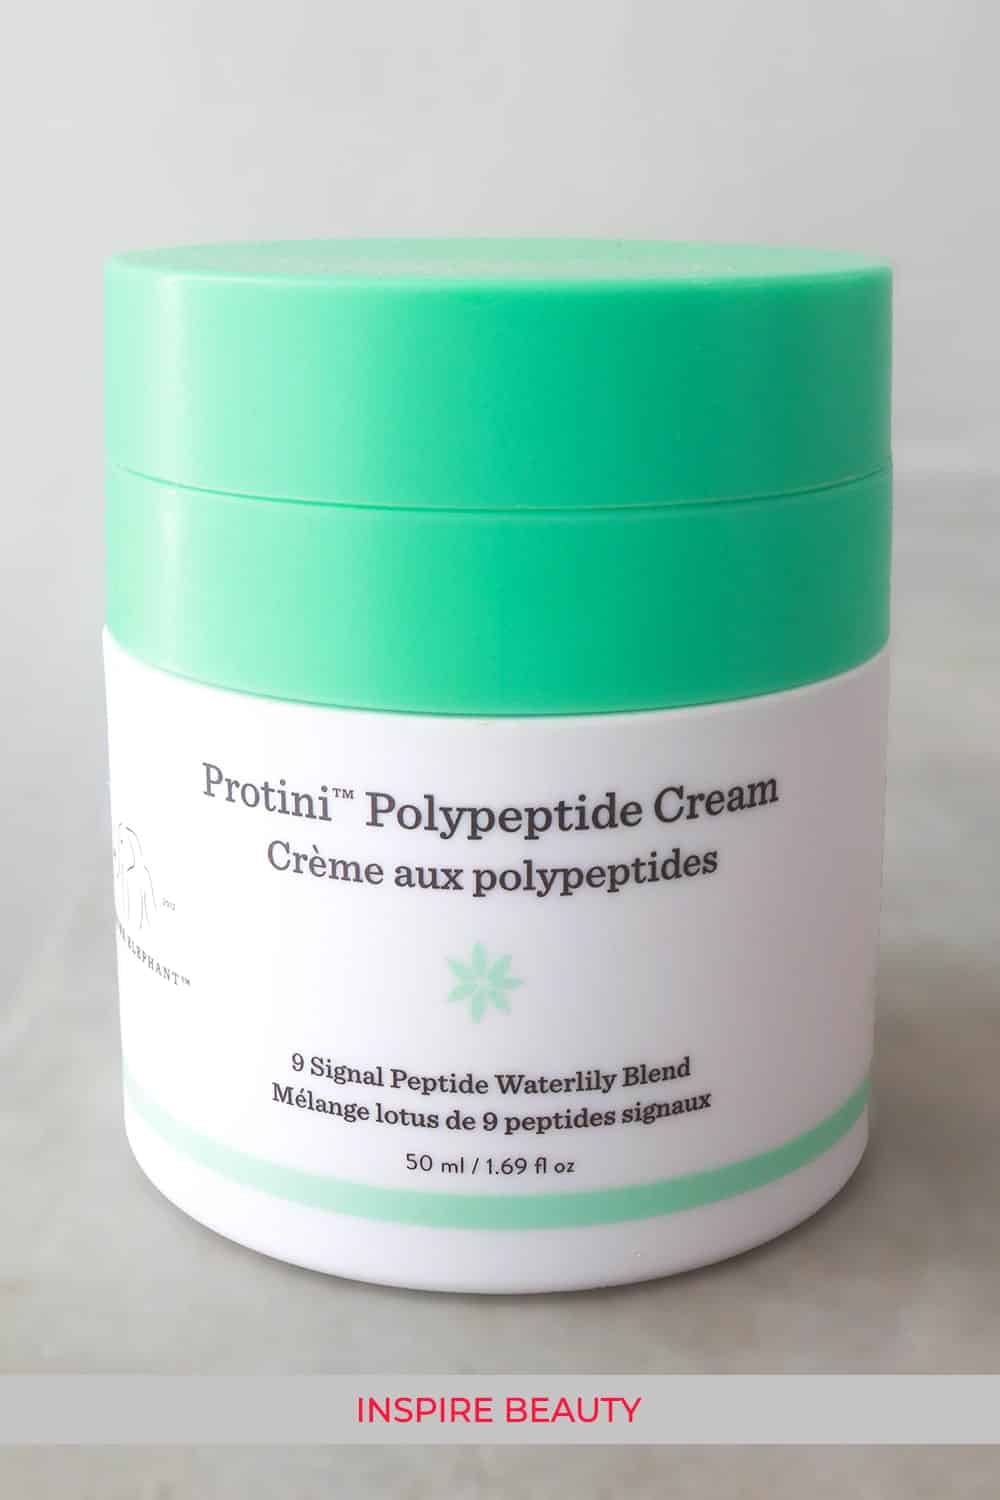 Drunk Elephant Protini Polypeptide Cream review. This moisturizer will plump, smooth and soften lines and wrinkles, great for maturing skin